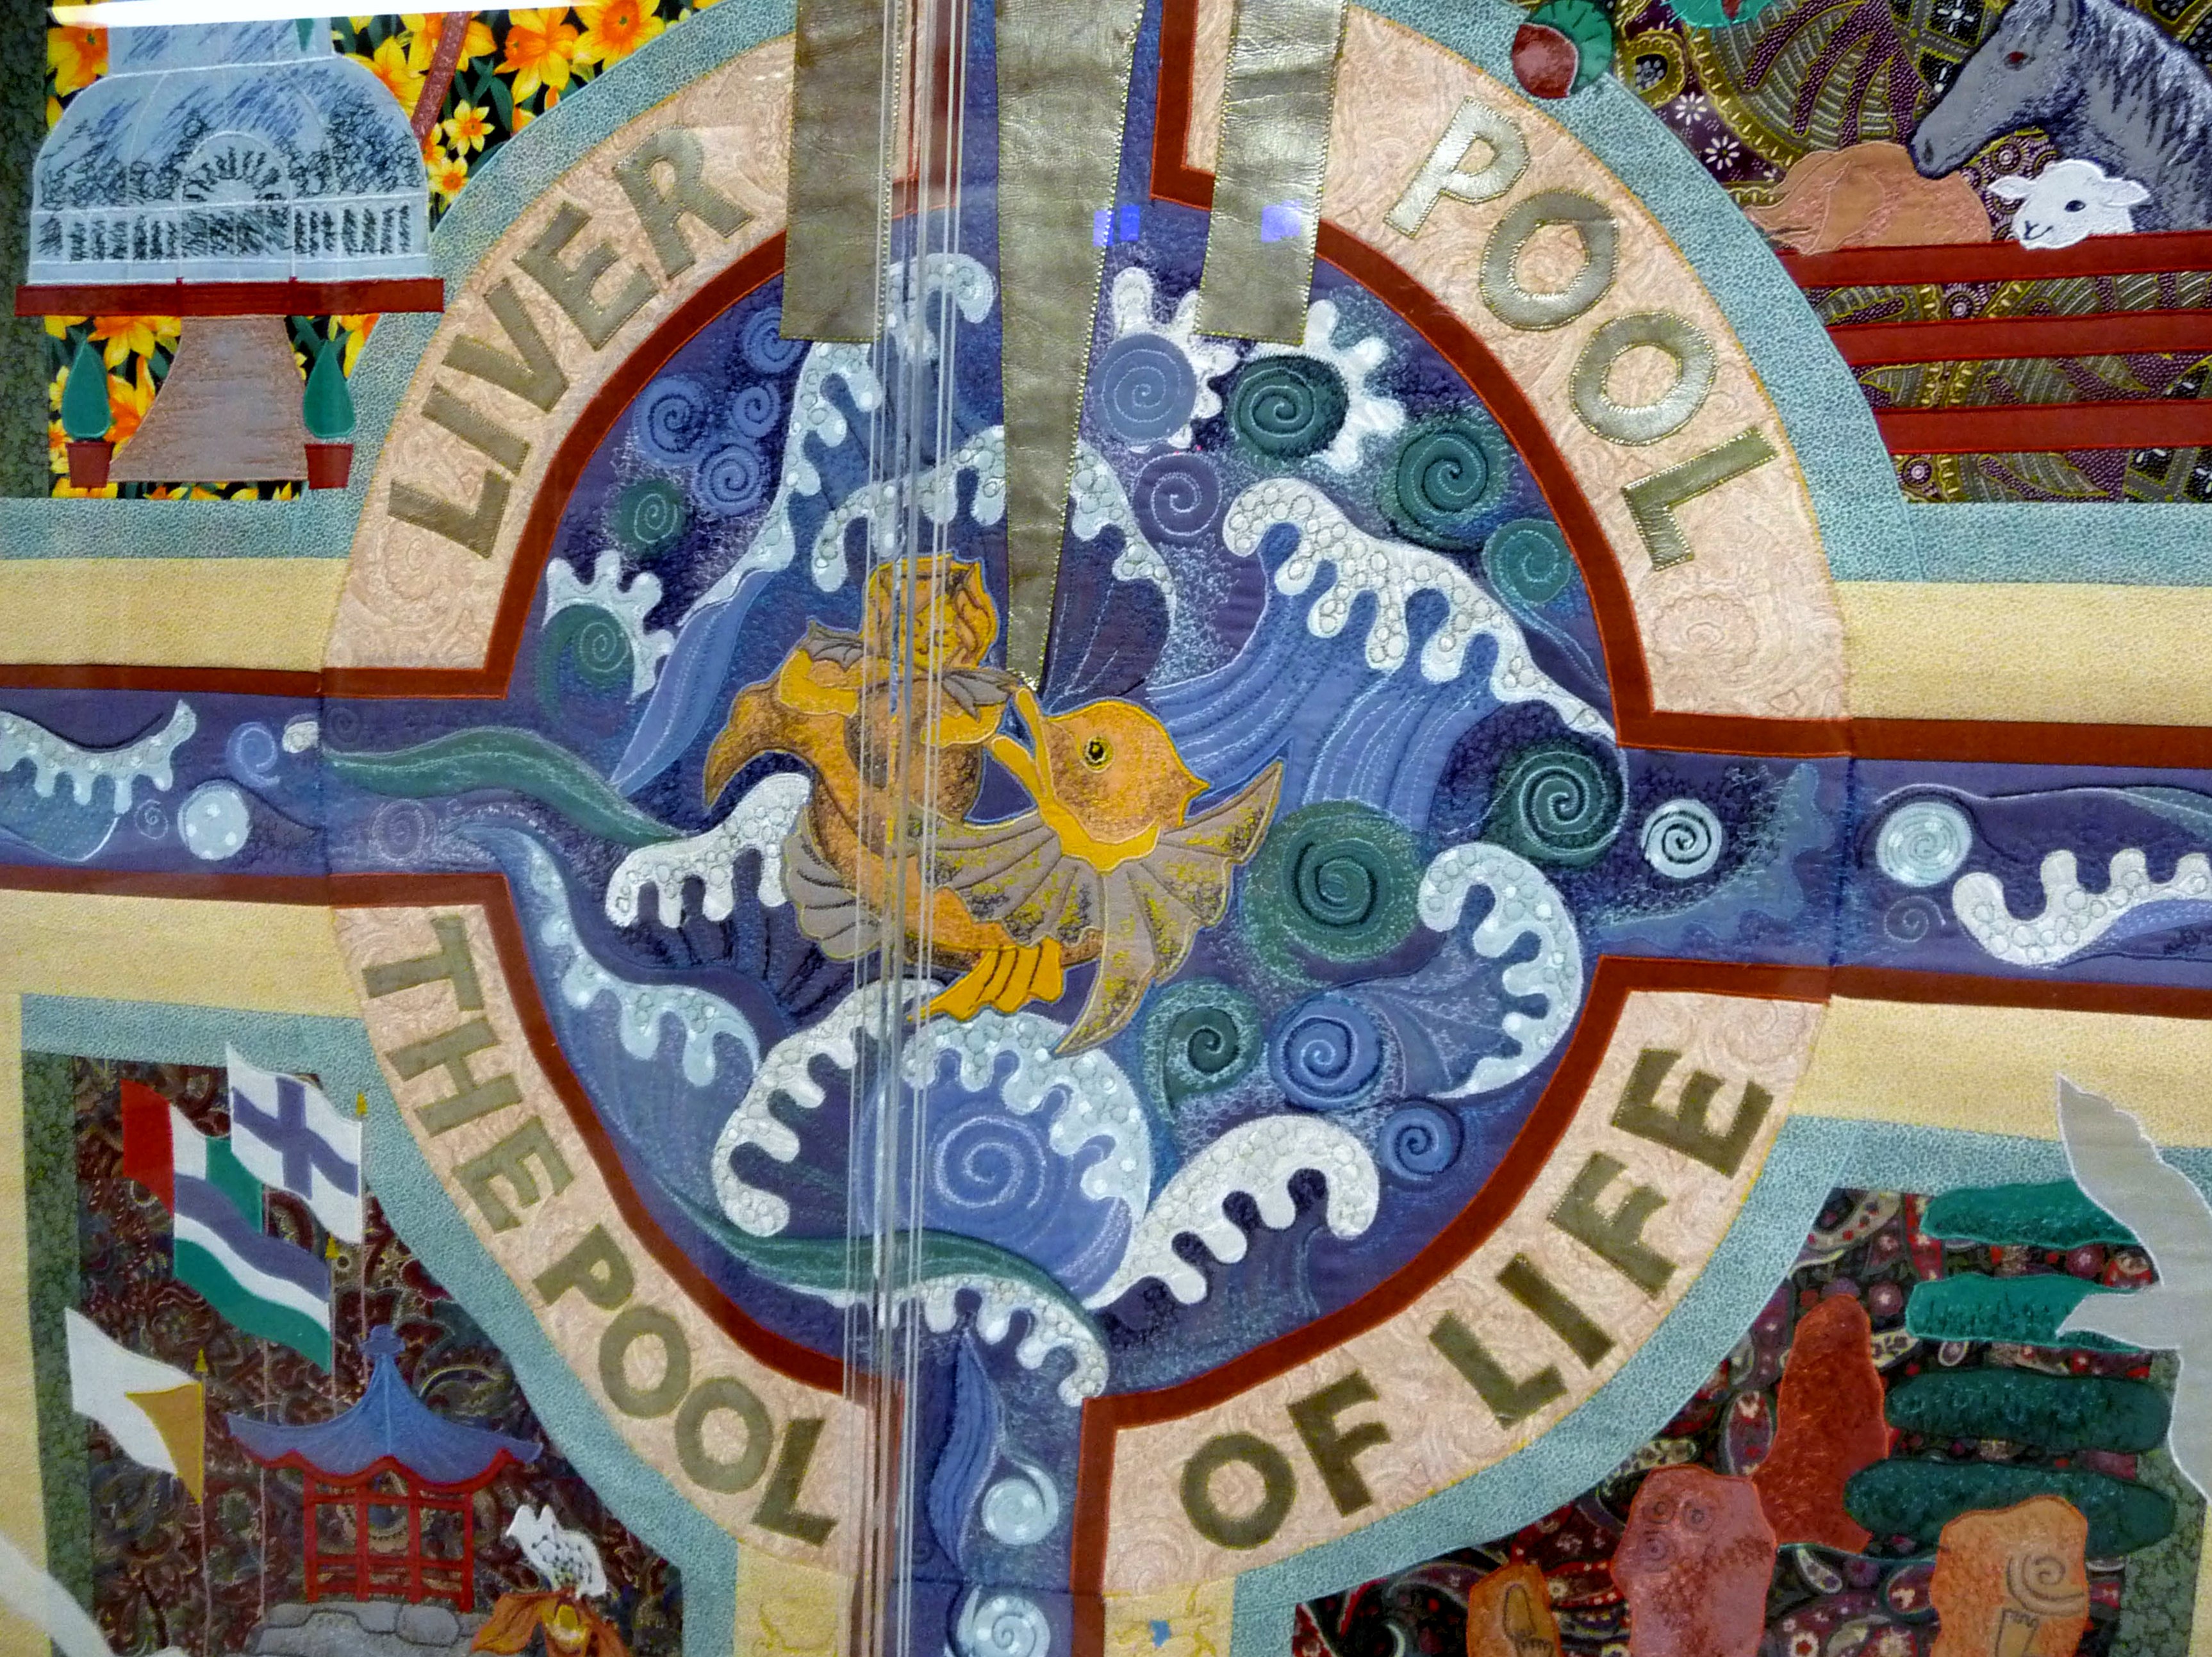 detail of "The Pool of Life Wall Hanging" by Norma Heron, 1995